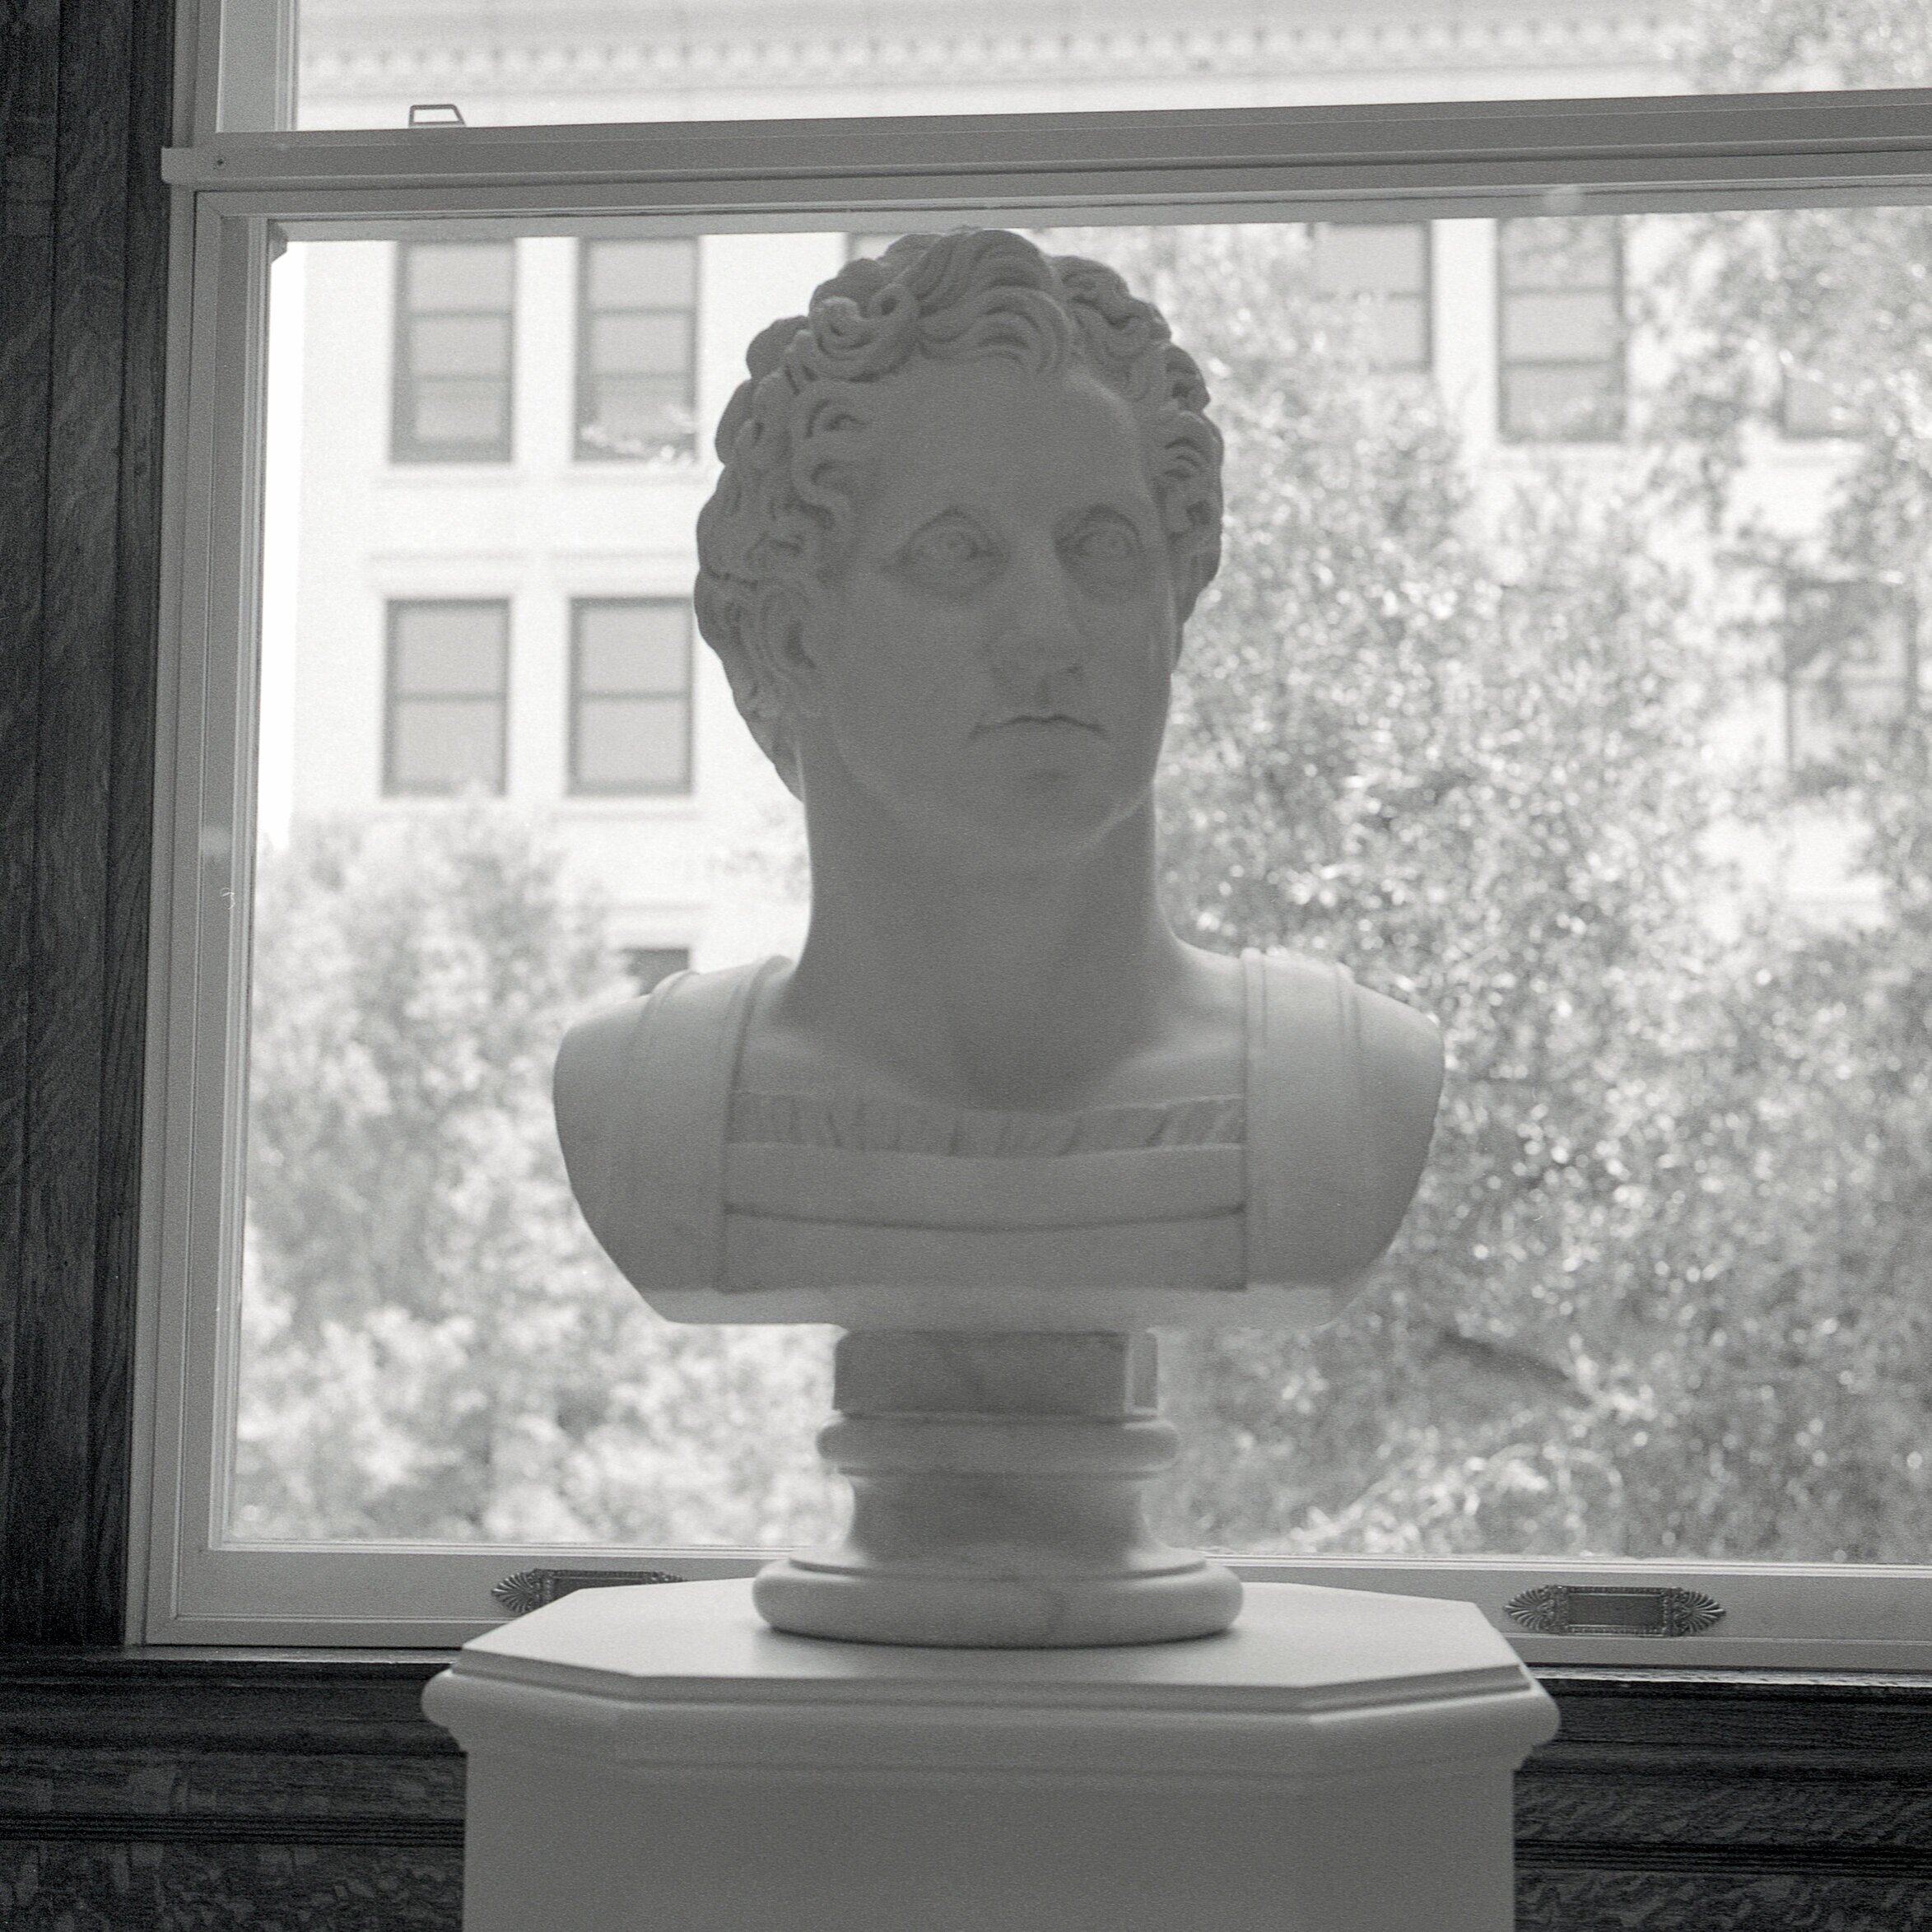 Marble bust of George Washington, done in the style of a Roman emperor